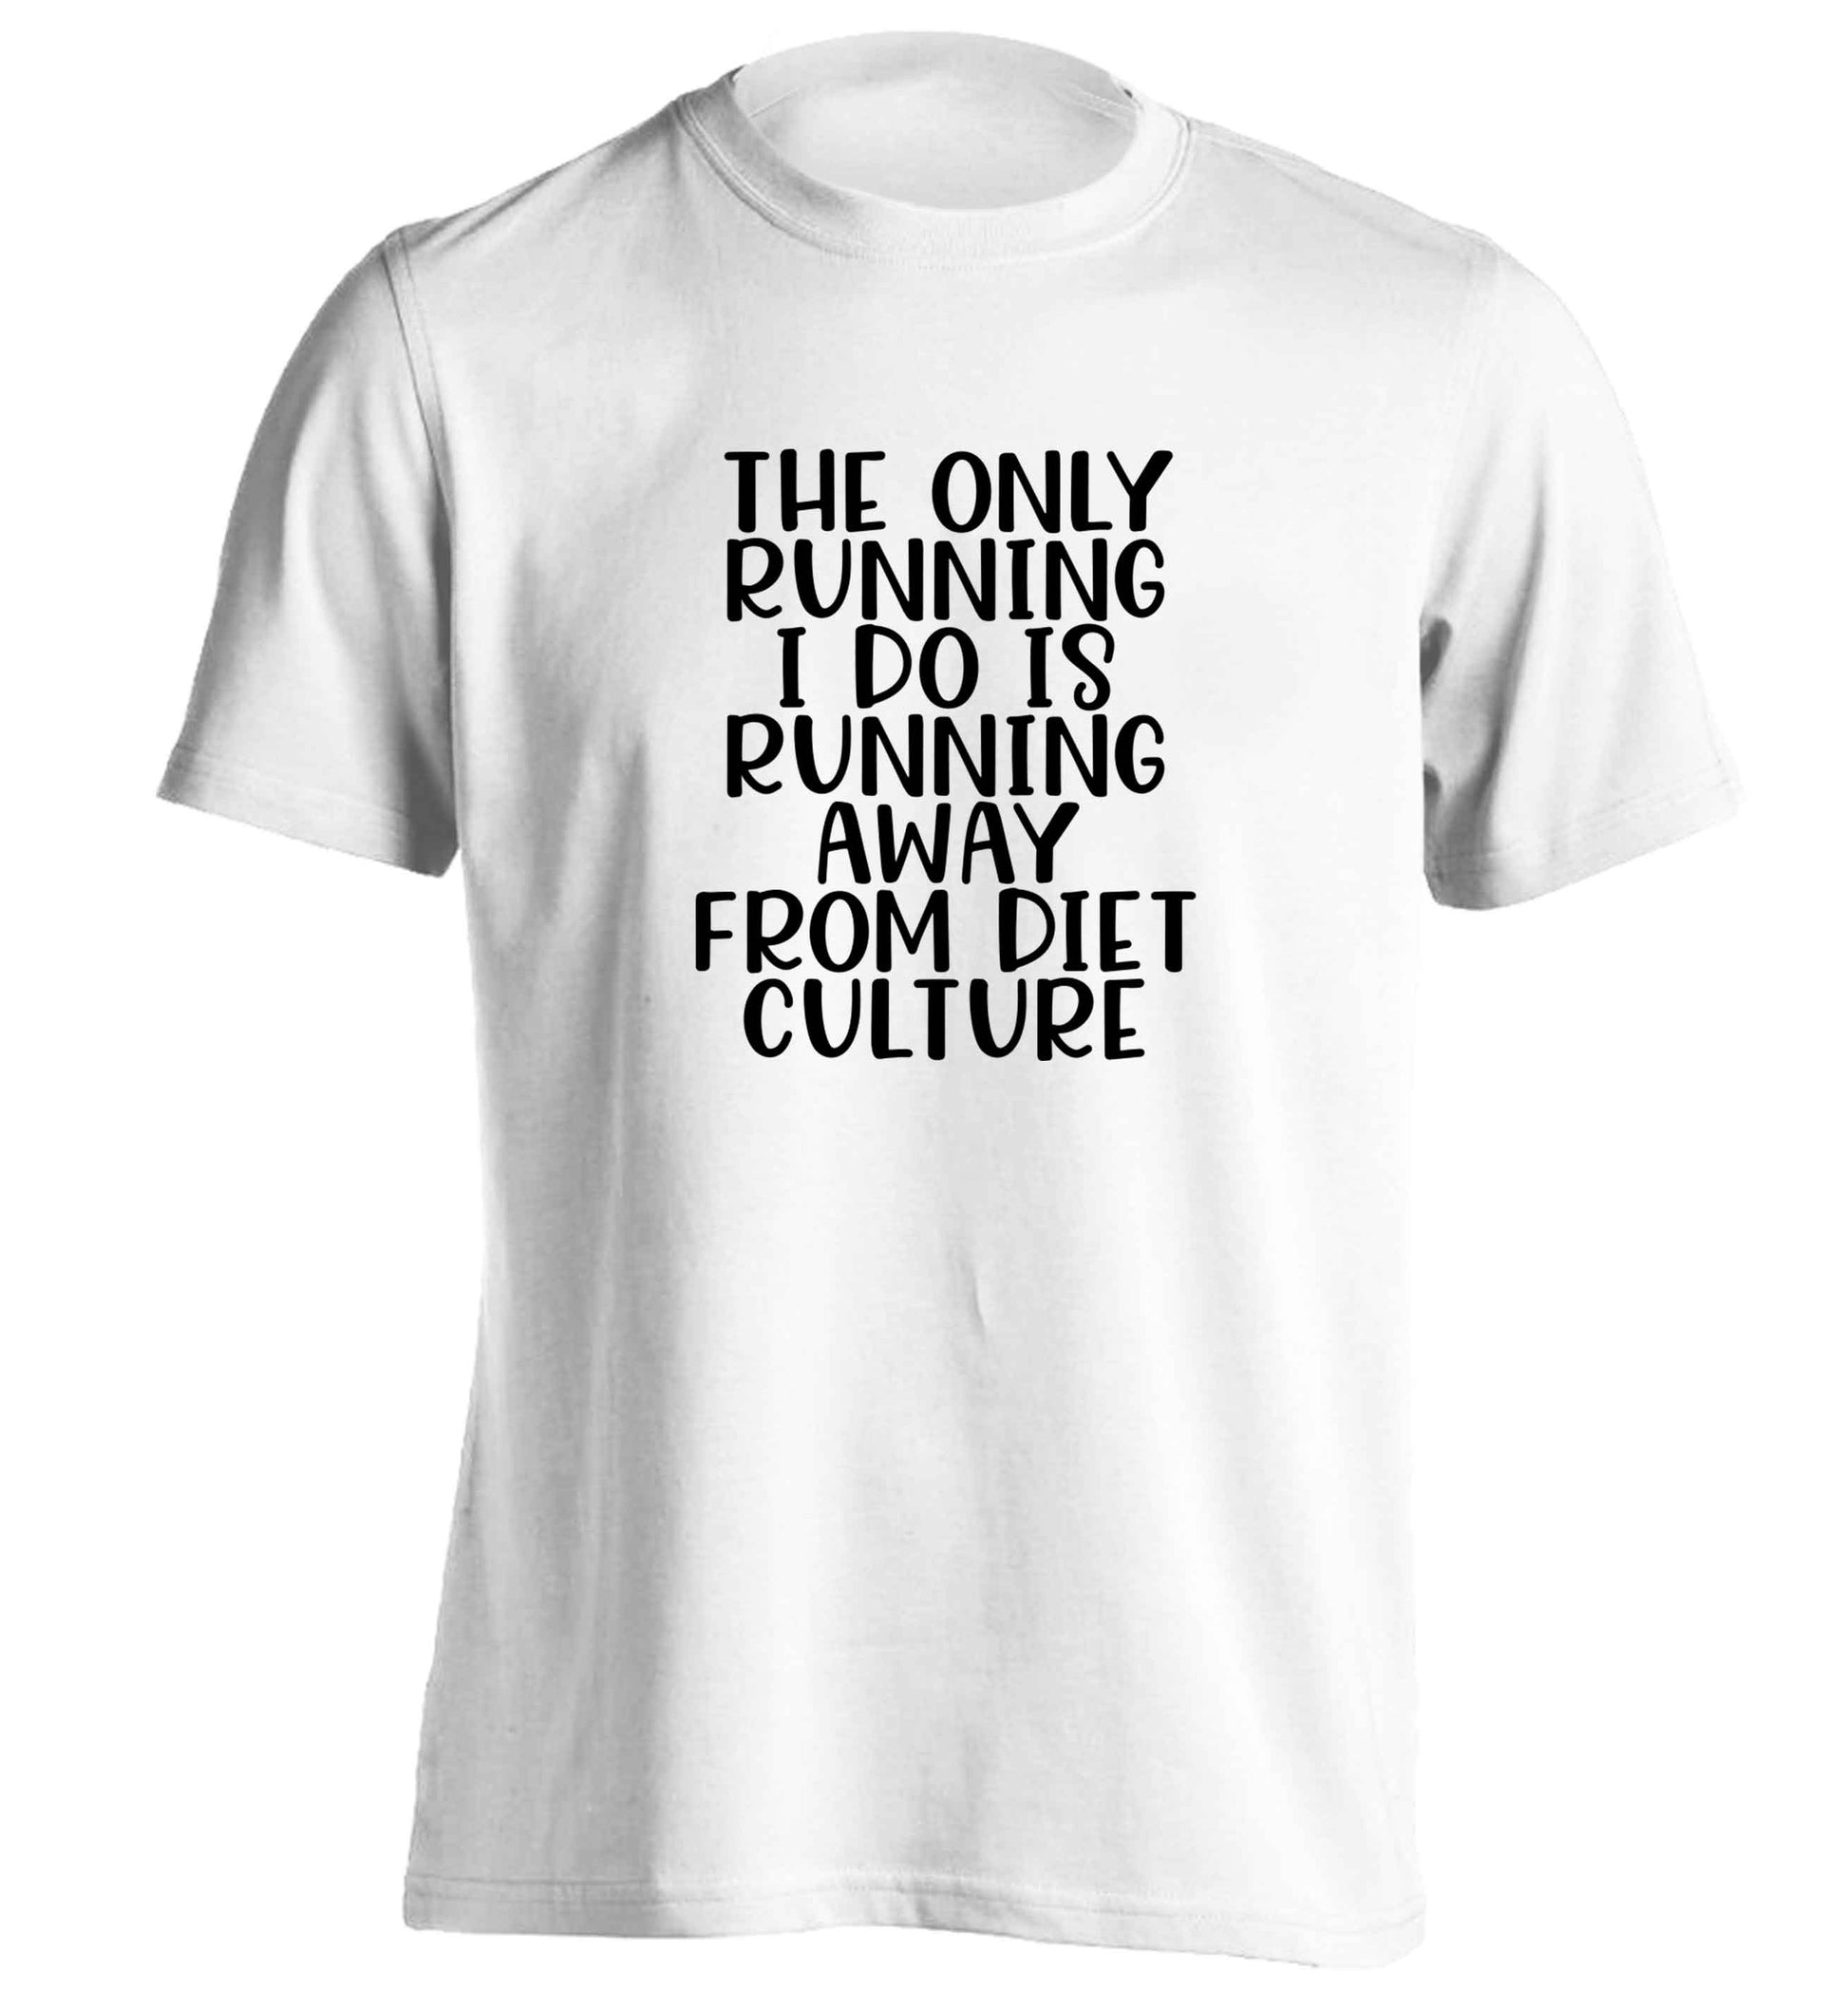 The only running I do is running away from diet culture adults unisex white Tshirt 2XL